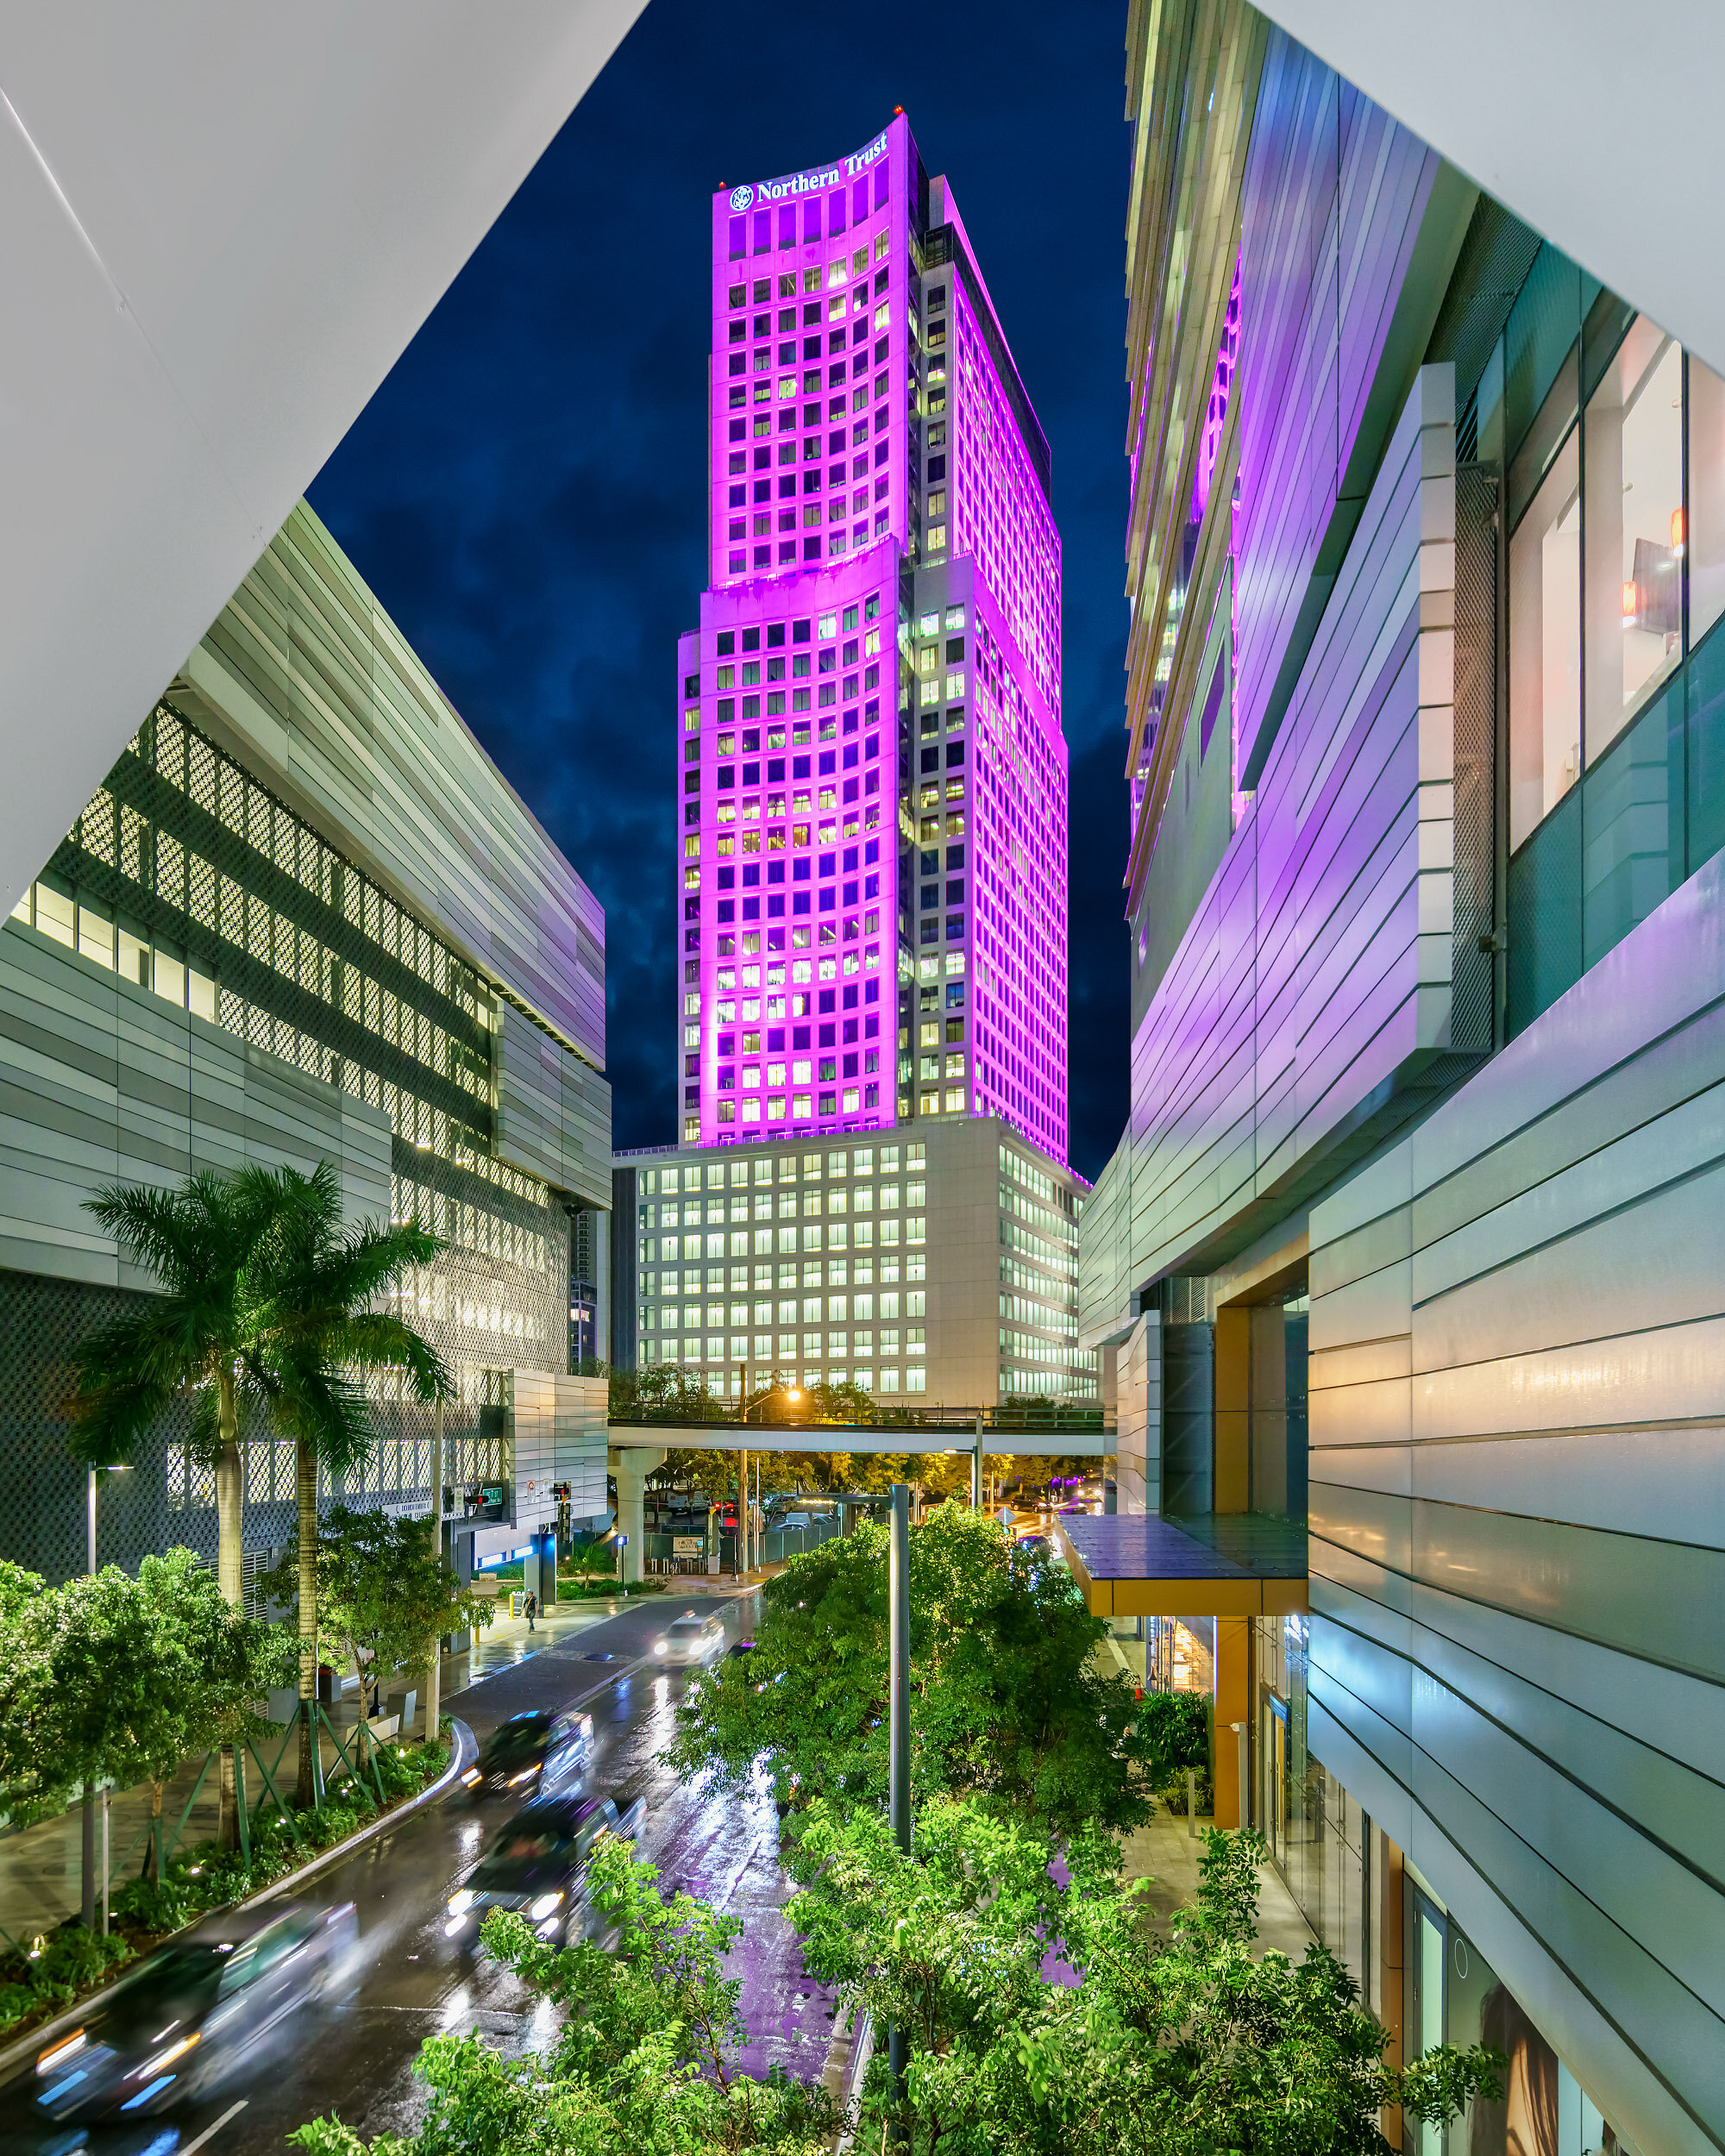 Led is Lit at 600 Brickell